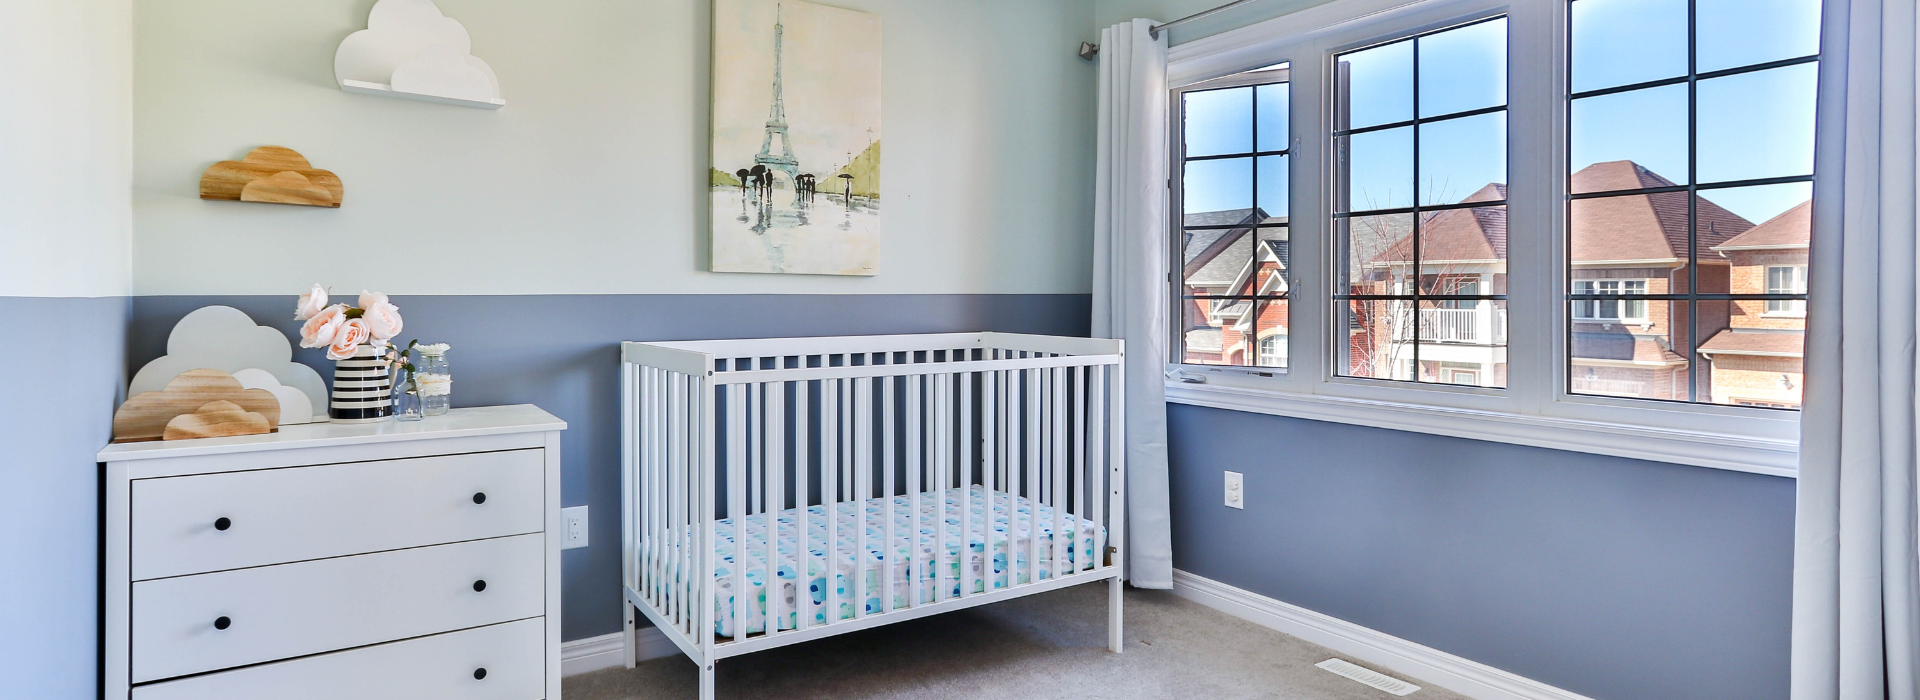 4 Tips for New Parents to Prep Their Nursery